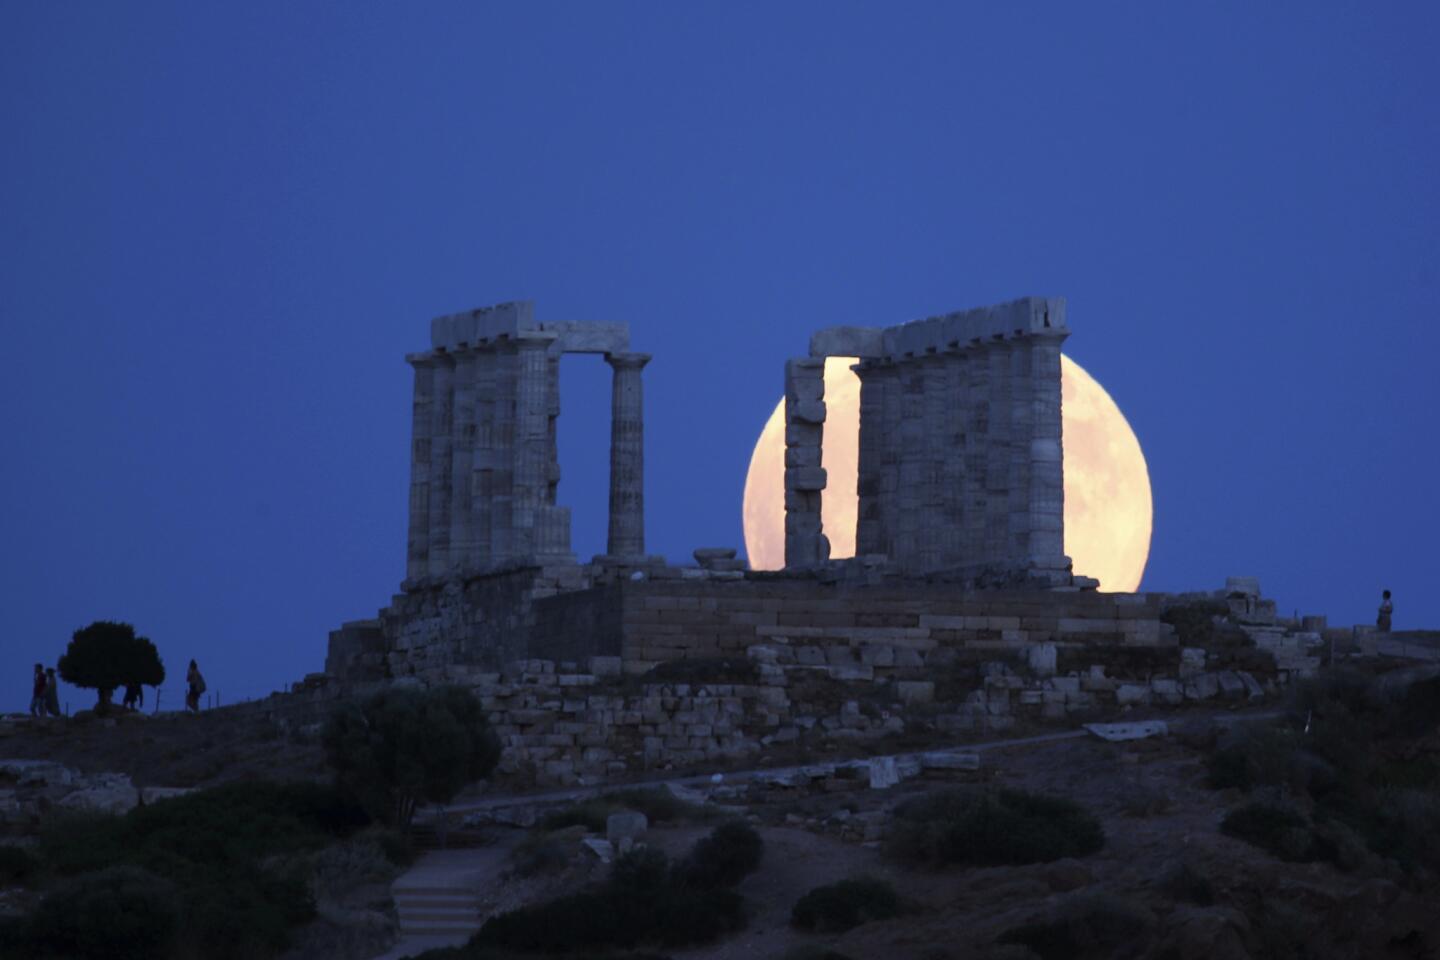 A full moon rises behind the ancient temple of Poseidon in cape Sounio, south of Athens. The complete lunar eclipse Friday when the sun, Earth and moon line up perfectly to cast Earth's shadow on the moon, will be the longest this century. It's called a "blood moon" because it turns a deep red and will be visible at different times around the world.